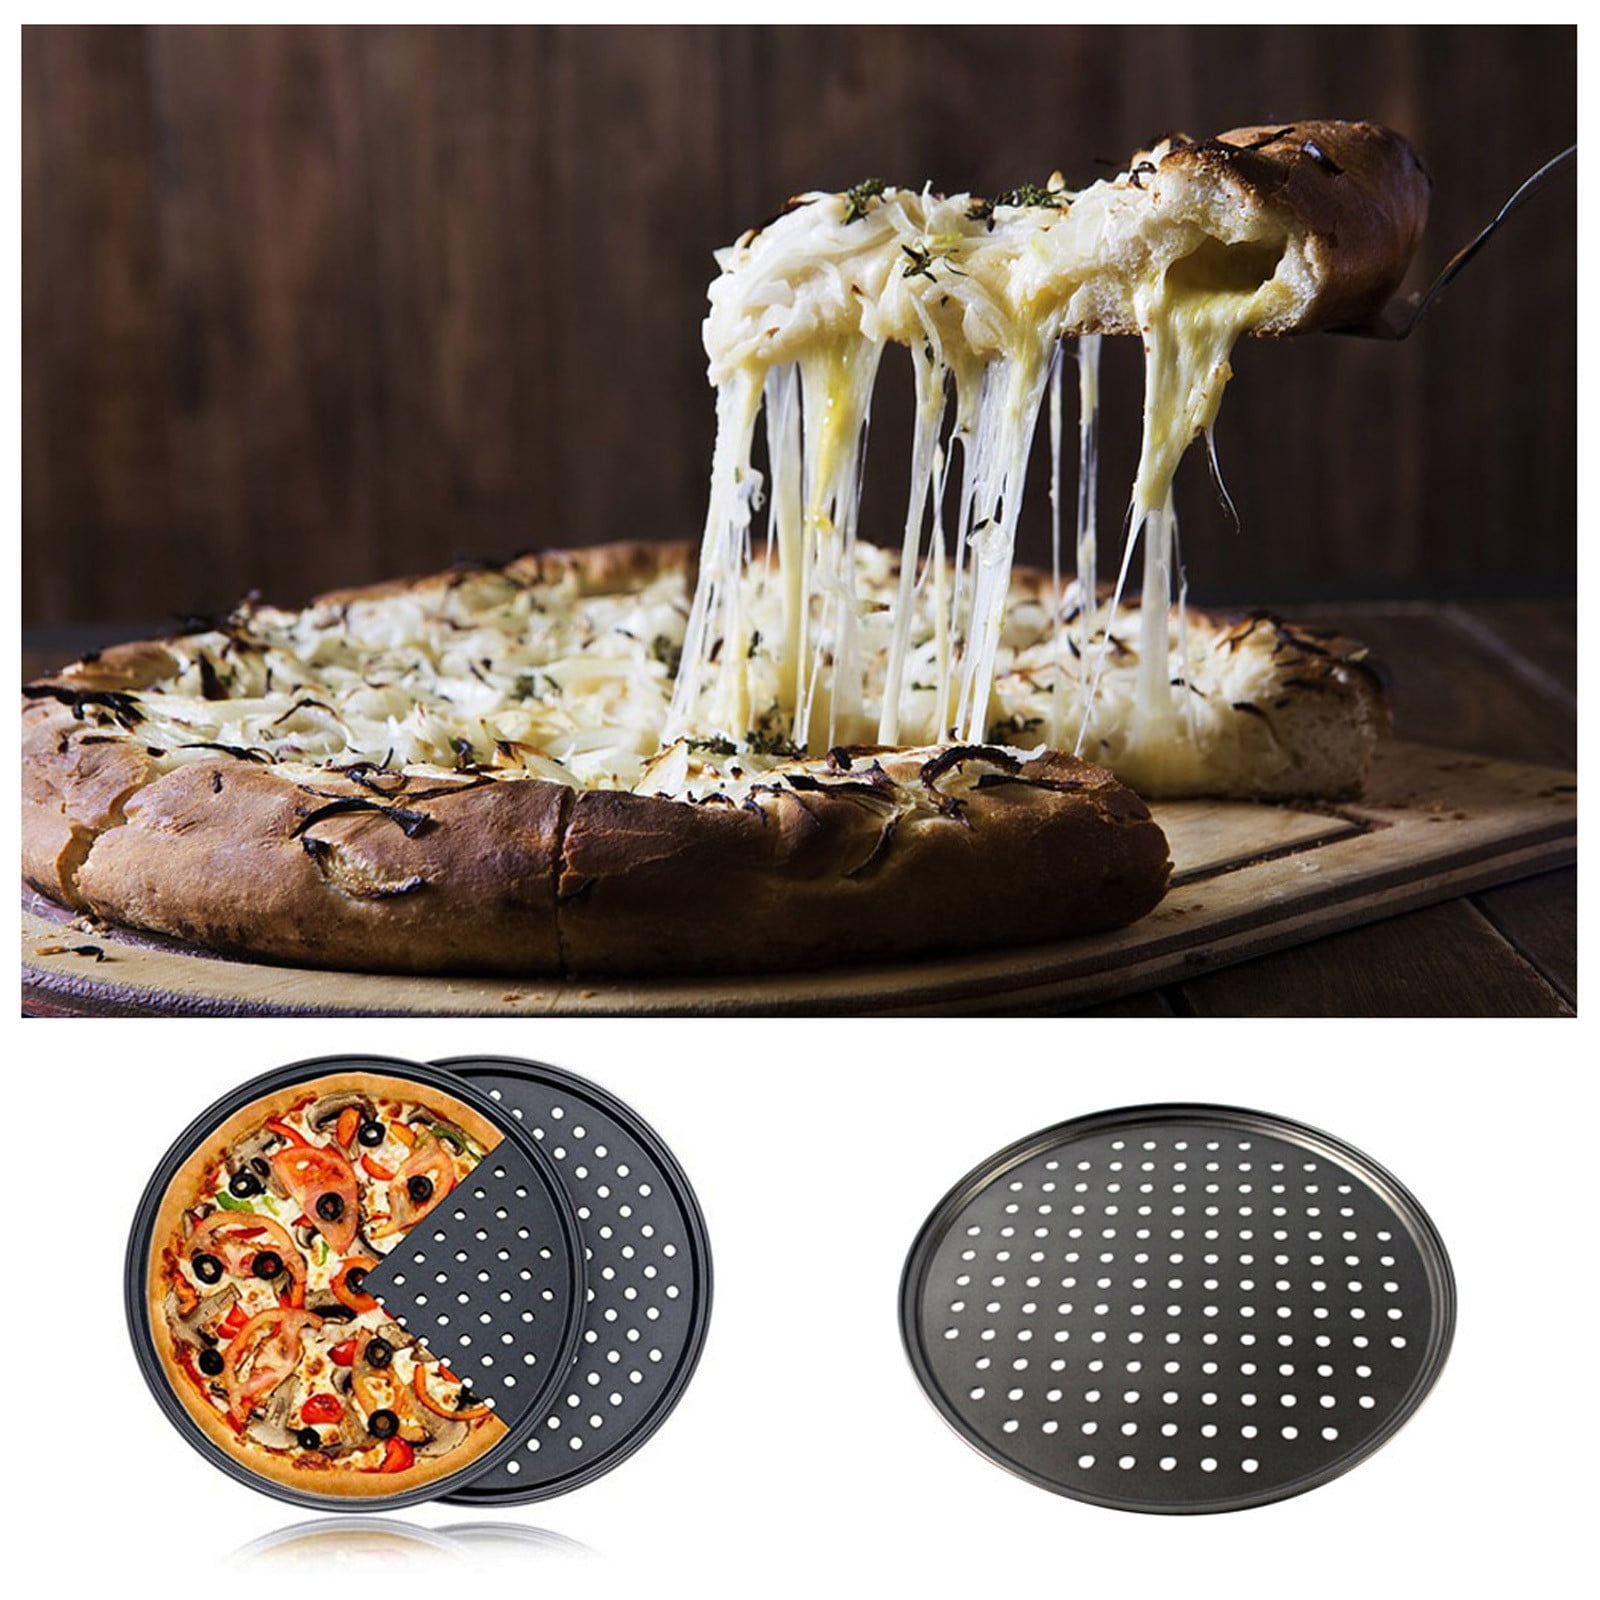 PIZZA OVEN Grill Pizza Pan 12 w Folding Wood Handle, Non-Stick, Air Vents  NEW!!